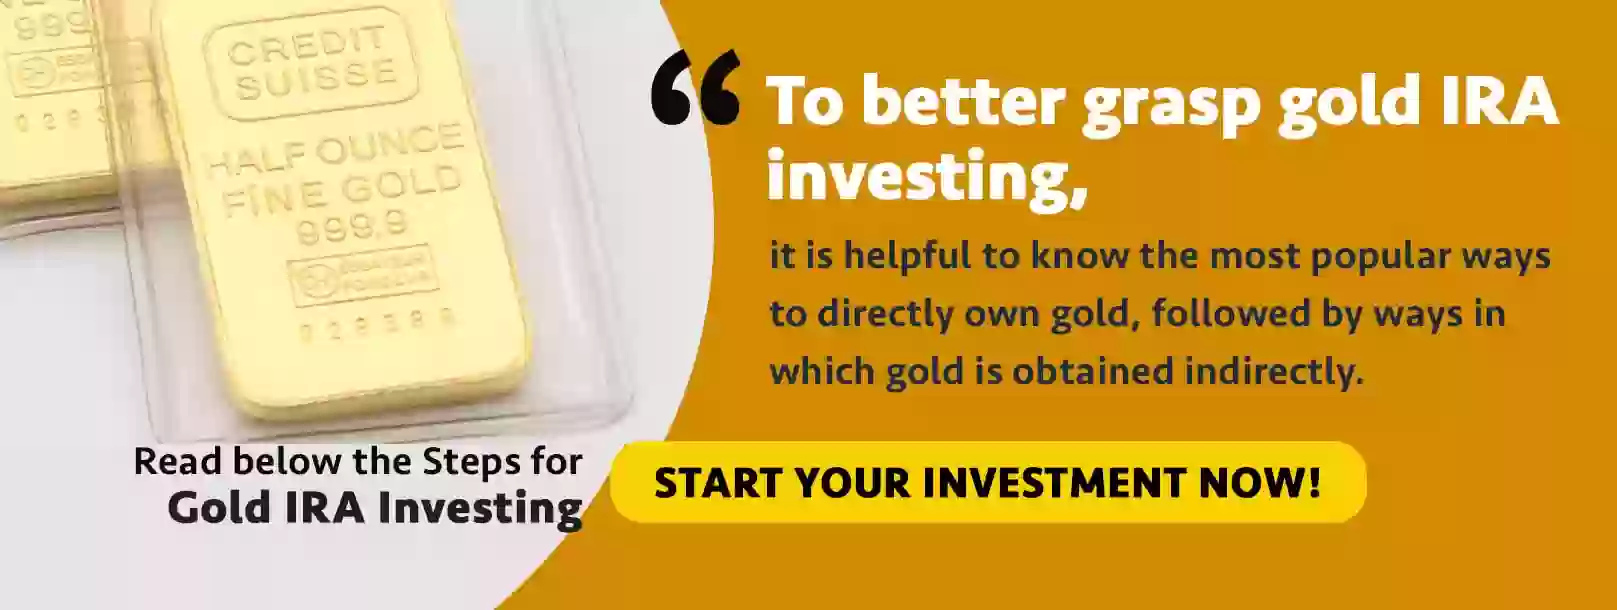 gold-investment-ban1